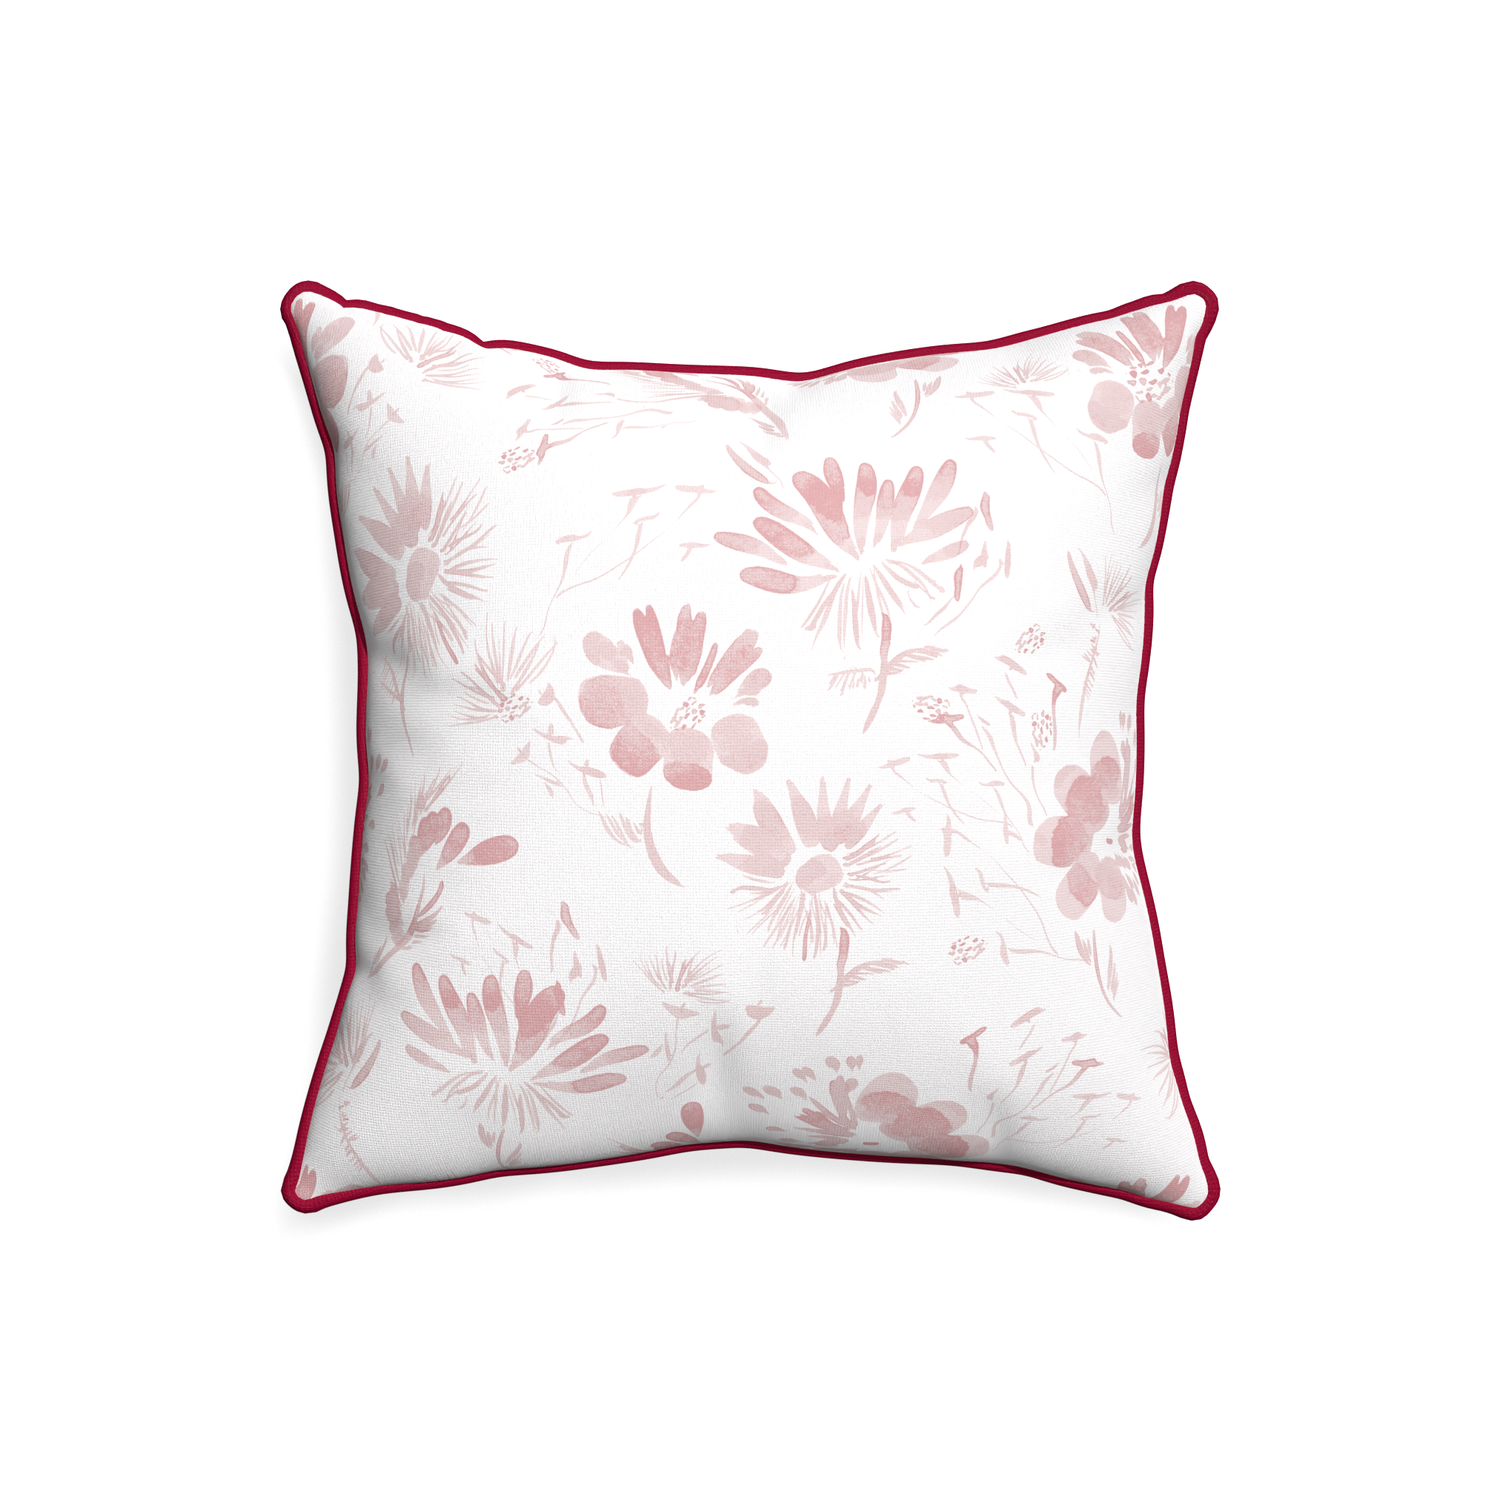 20-square blake custom pink floralpillow with raspberry piping on white background